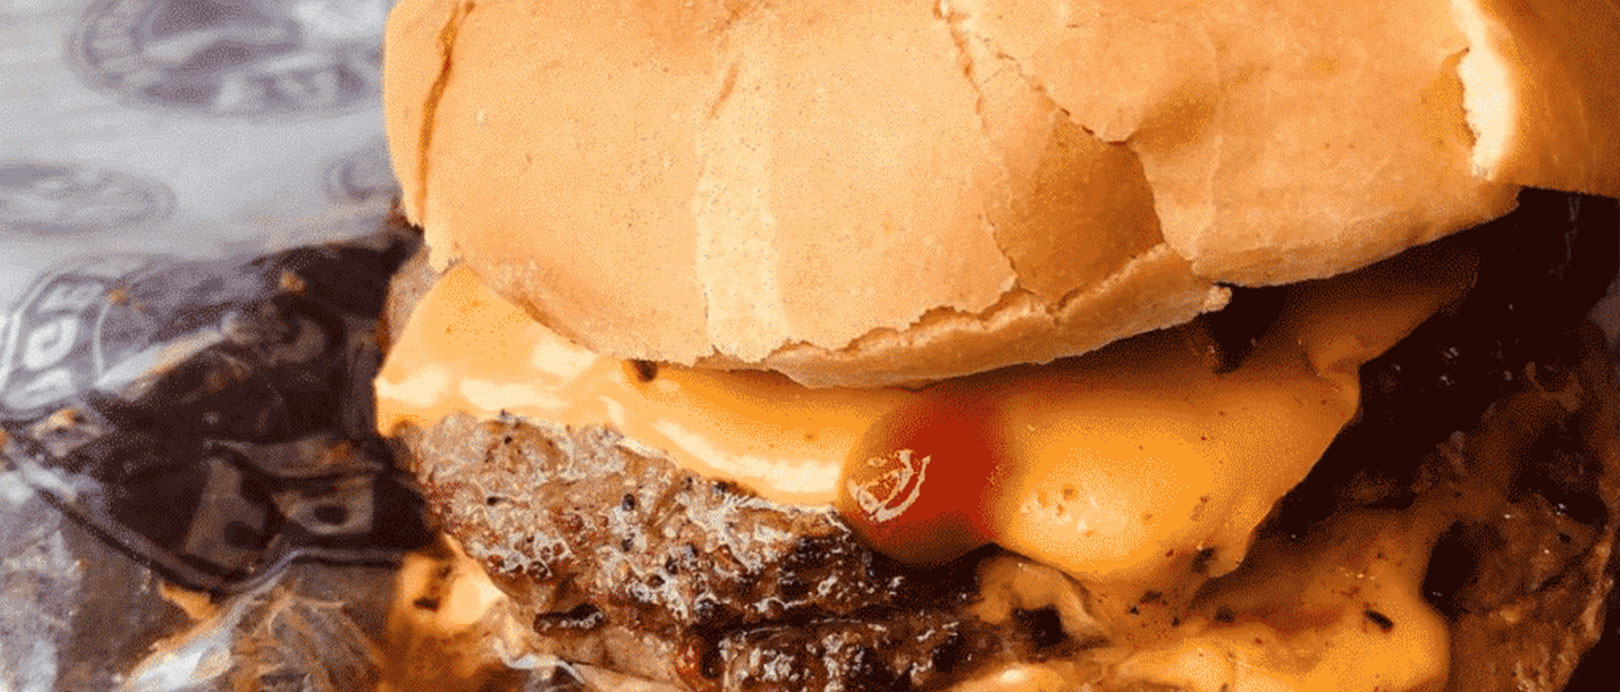 Quality Burgers: 4 Things You Need to Know About Certified Angus Beef -  Burger Republic